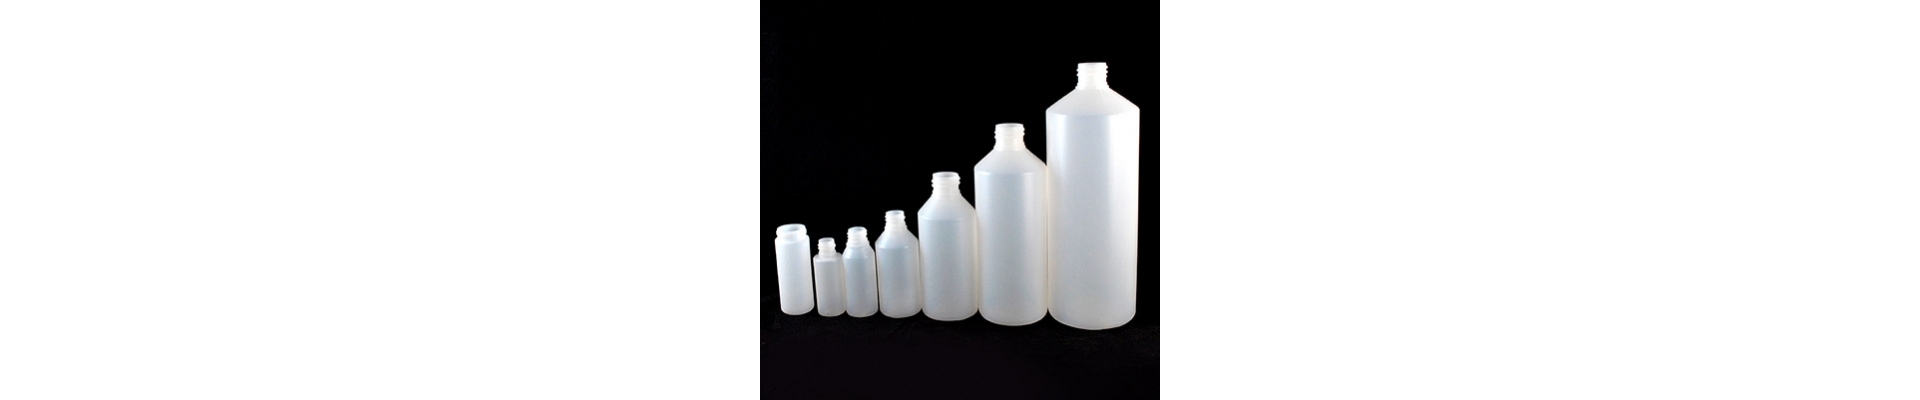 Translucent (Natural) HDPE and LDPE Plastic Bottles